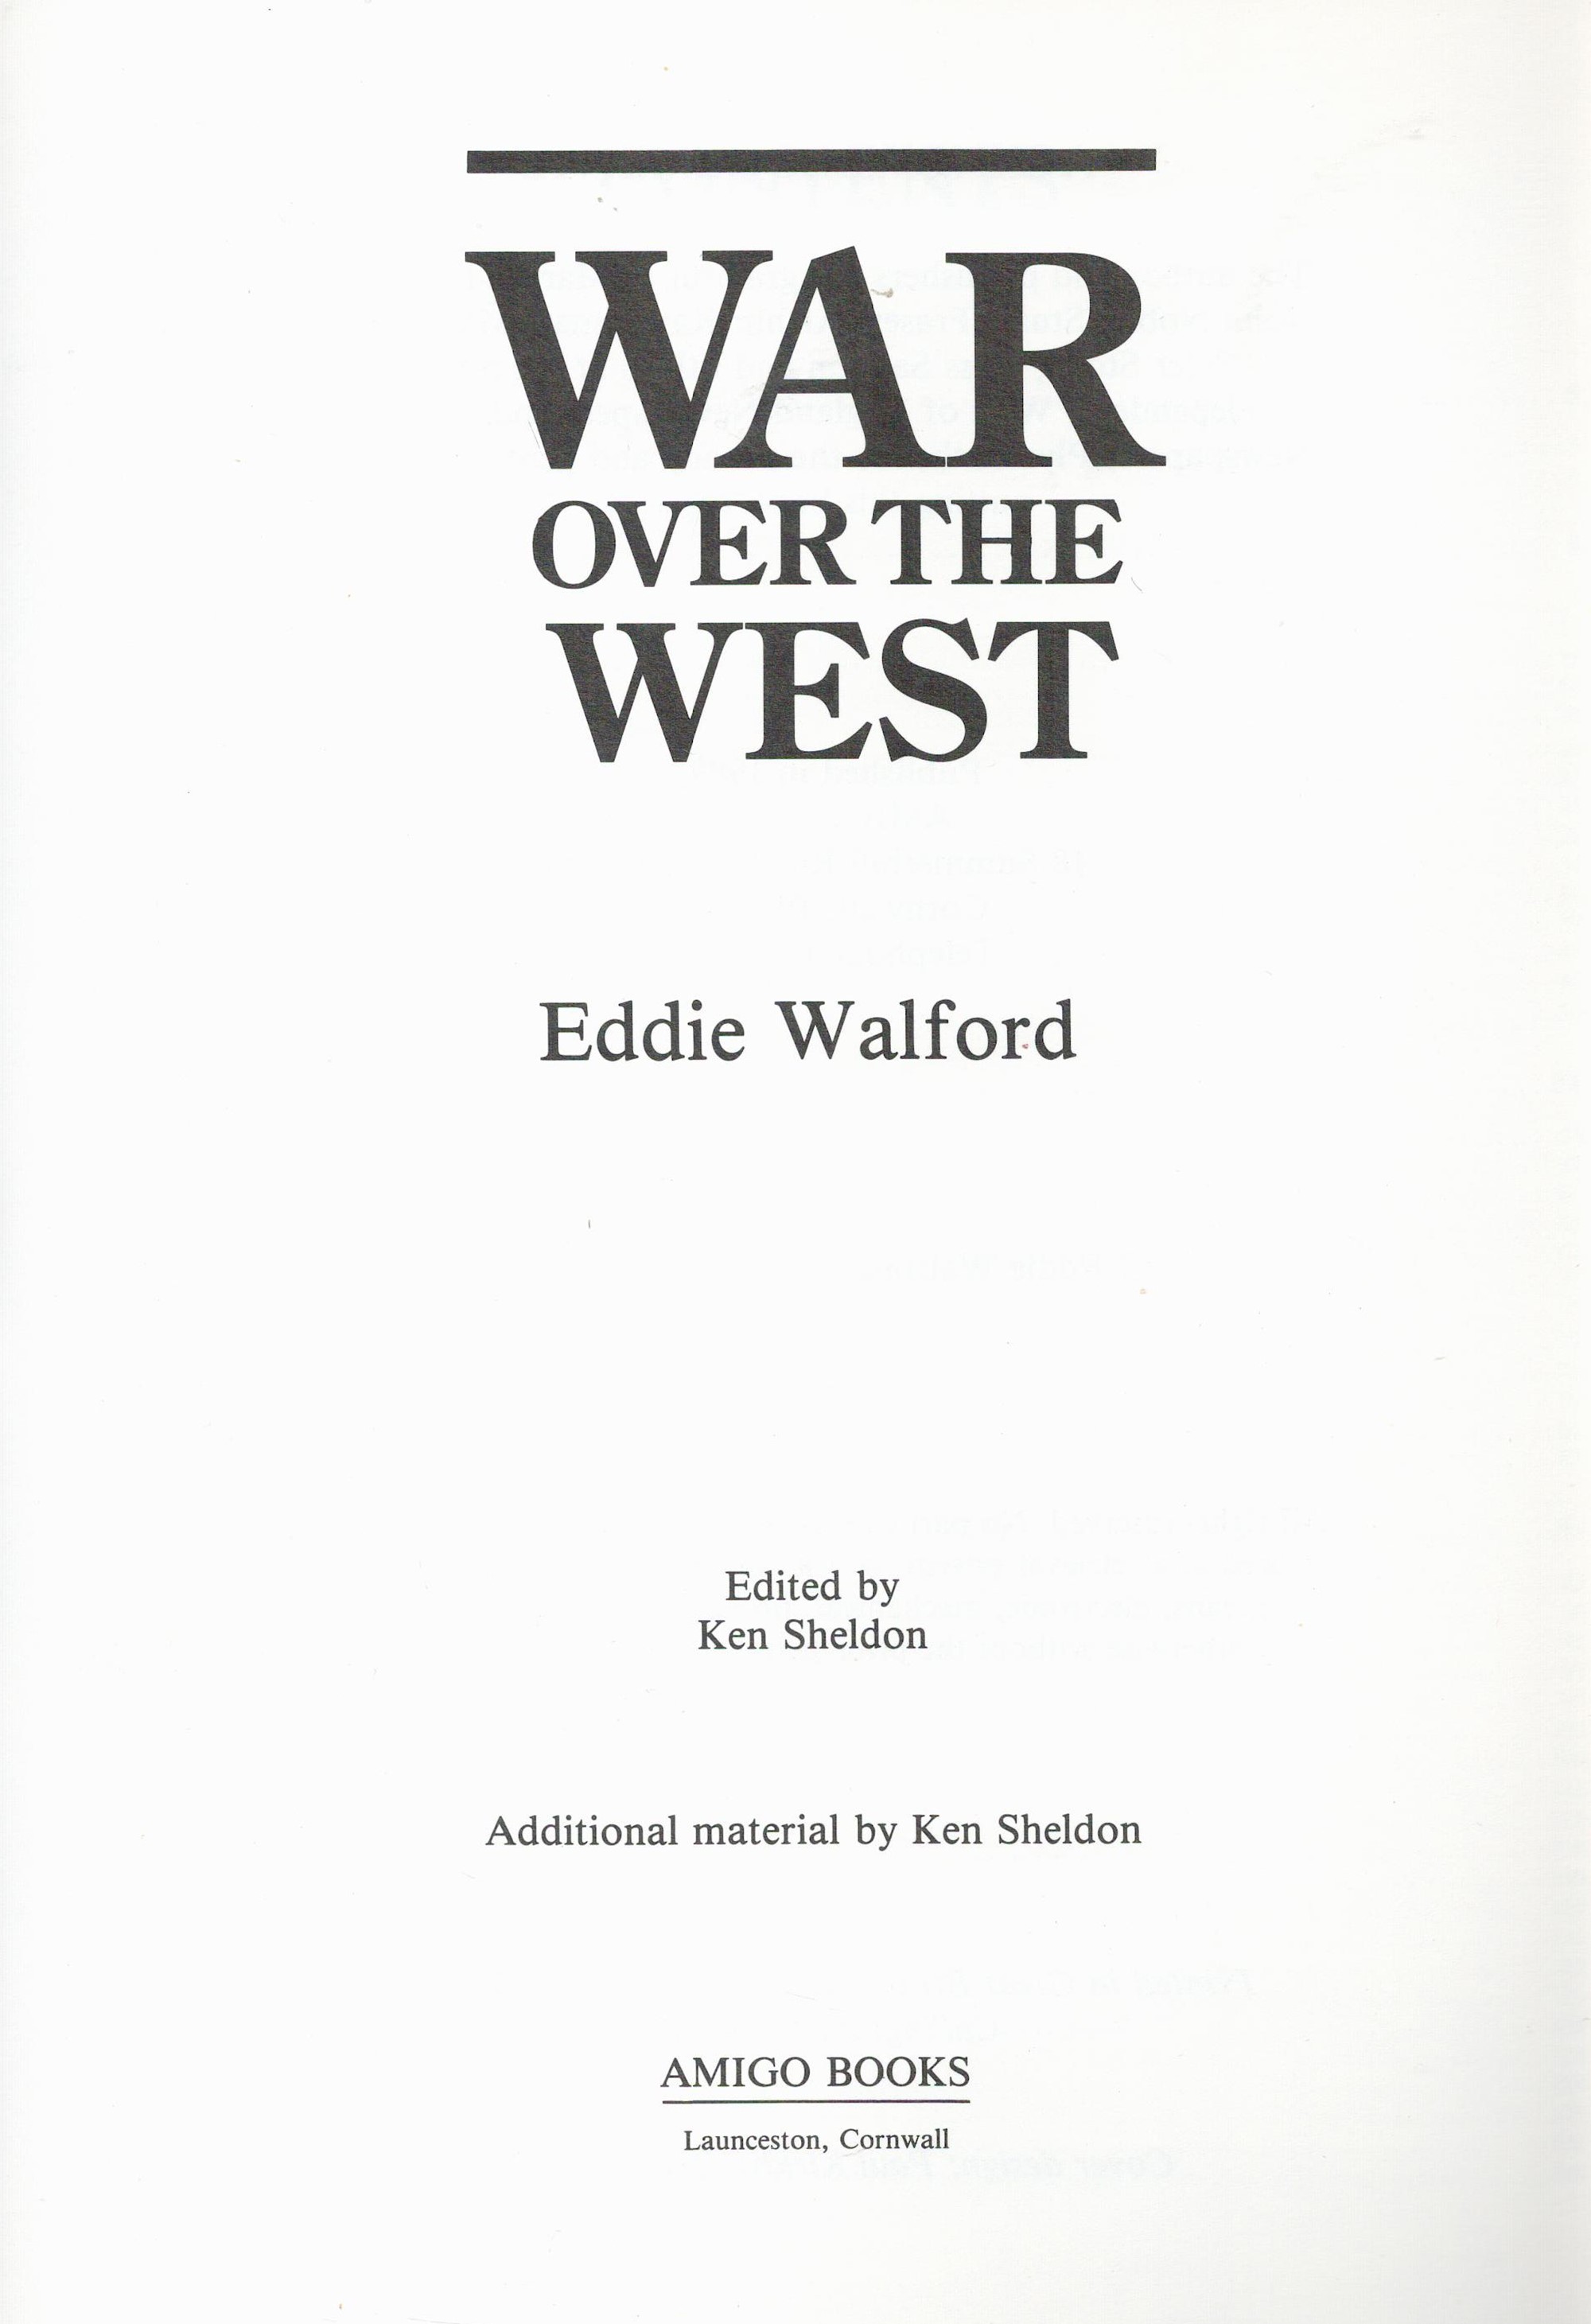 War over The West by Eddie Walford Softback Book 1989 First Edition published by Amigo Books some - Image 2 of 3